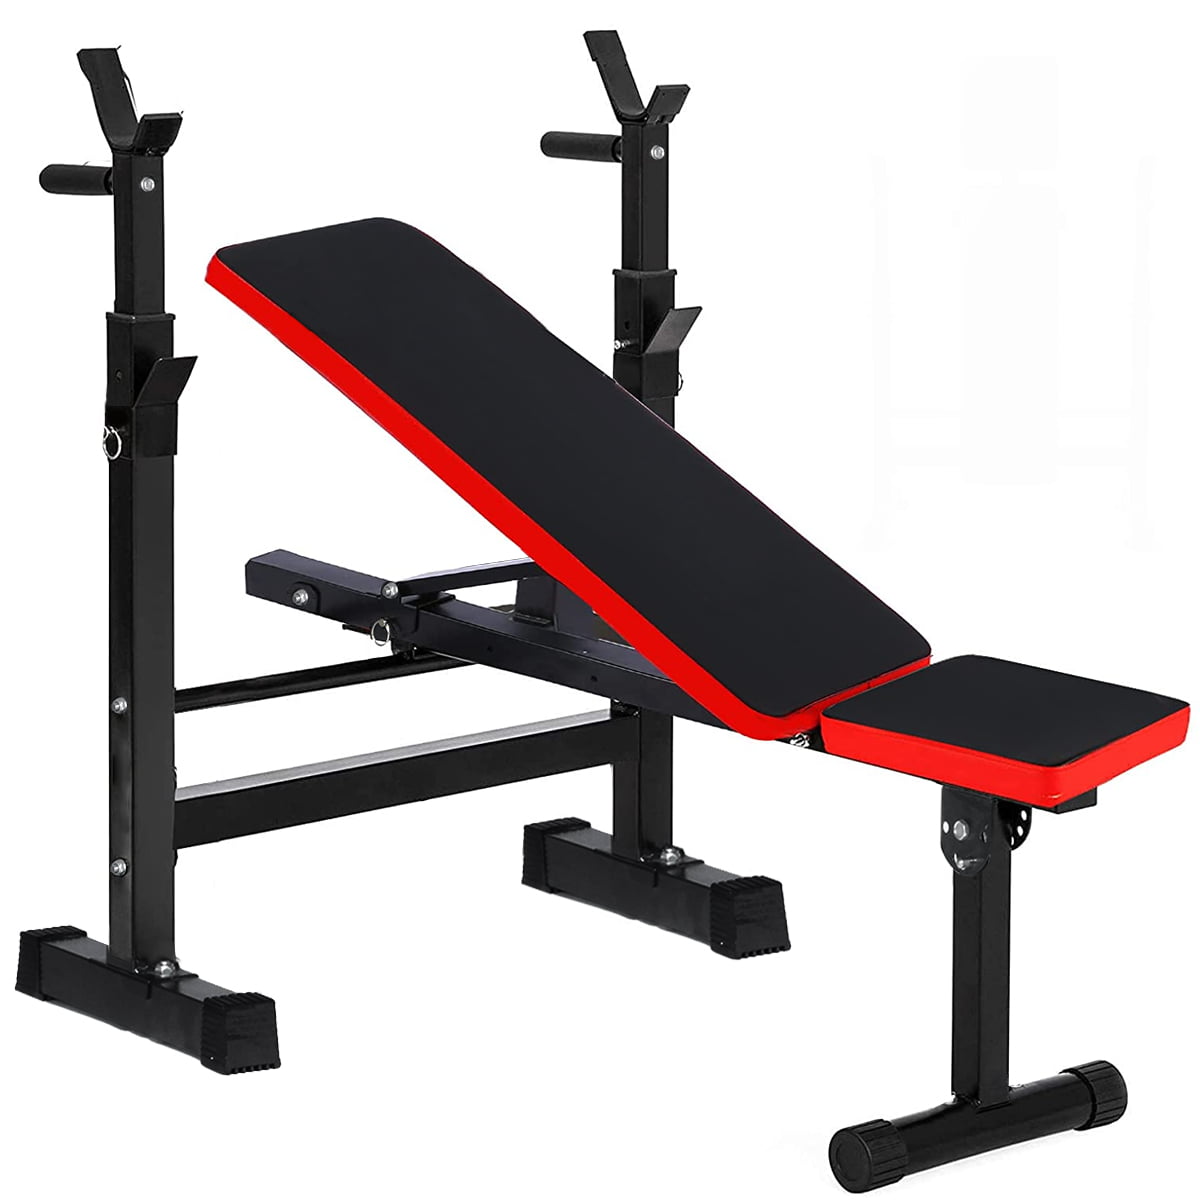 Weight Bench Set With Weight Home Gym Bench Press Lifting Barbell Rack Exercise 